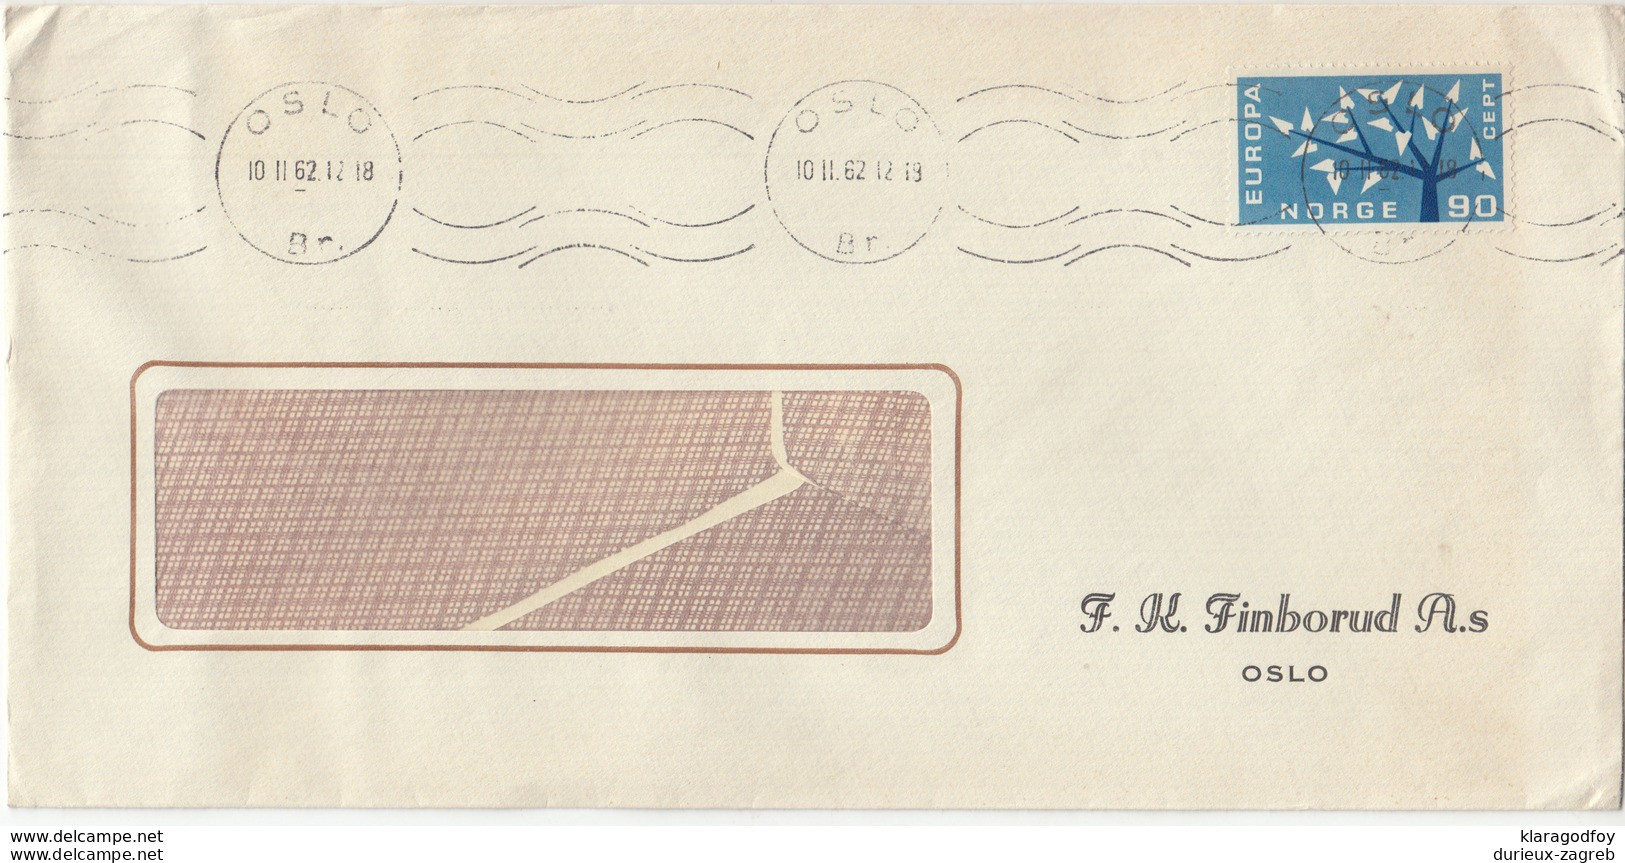 F. K. Finborud Company Letter Cover Travelled 1962 Europa CEPT Stamp B170925 - Covers & Documents